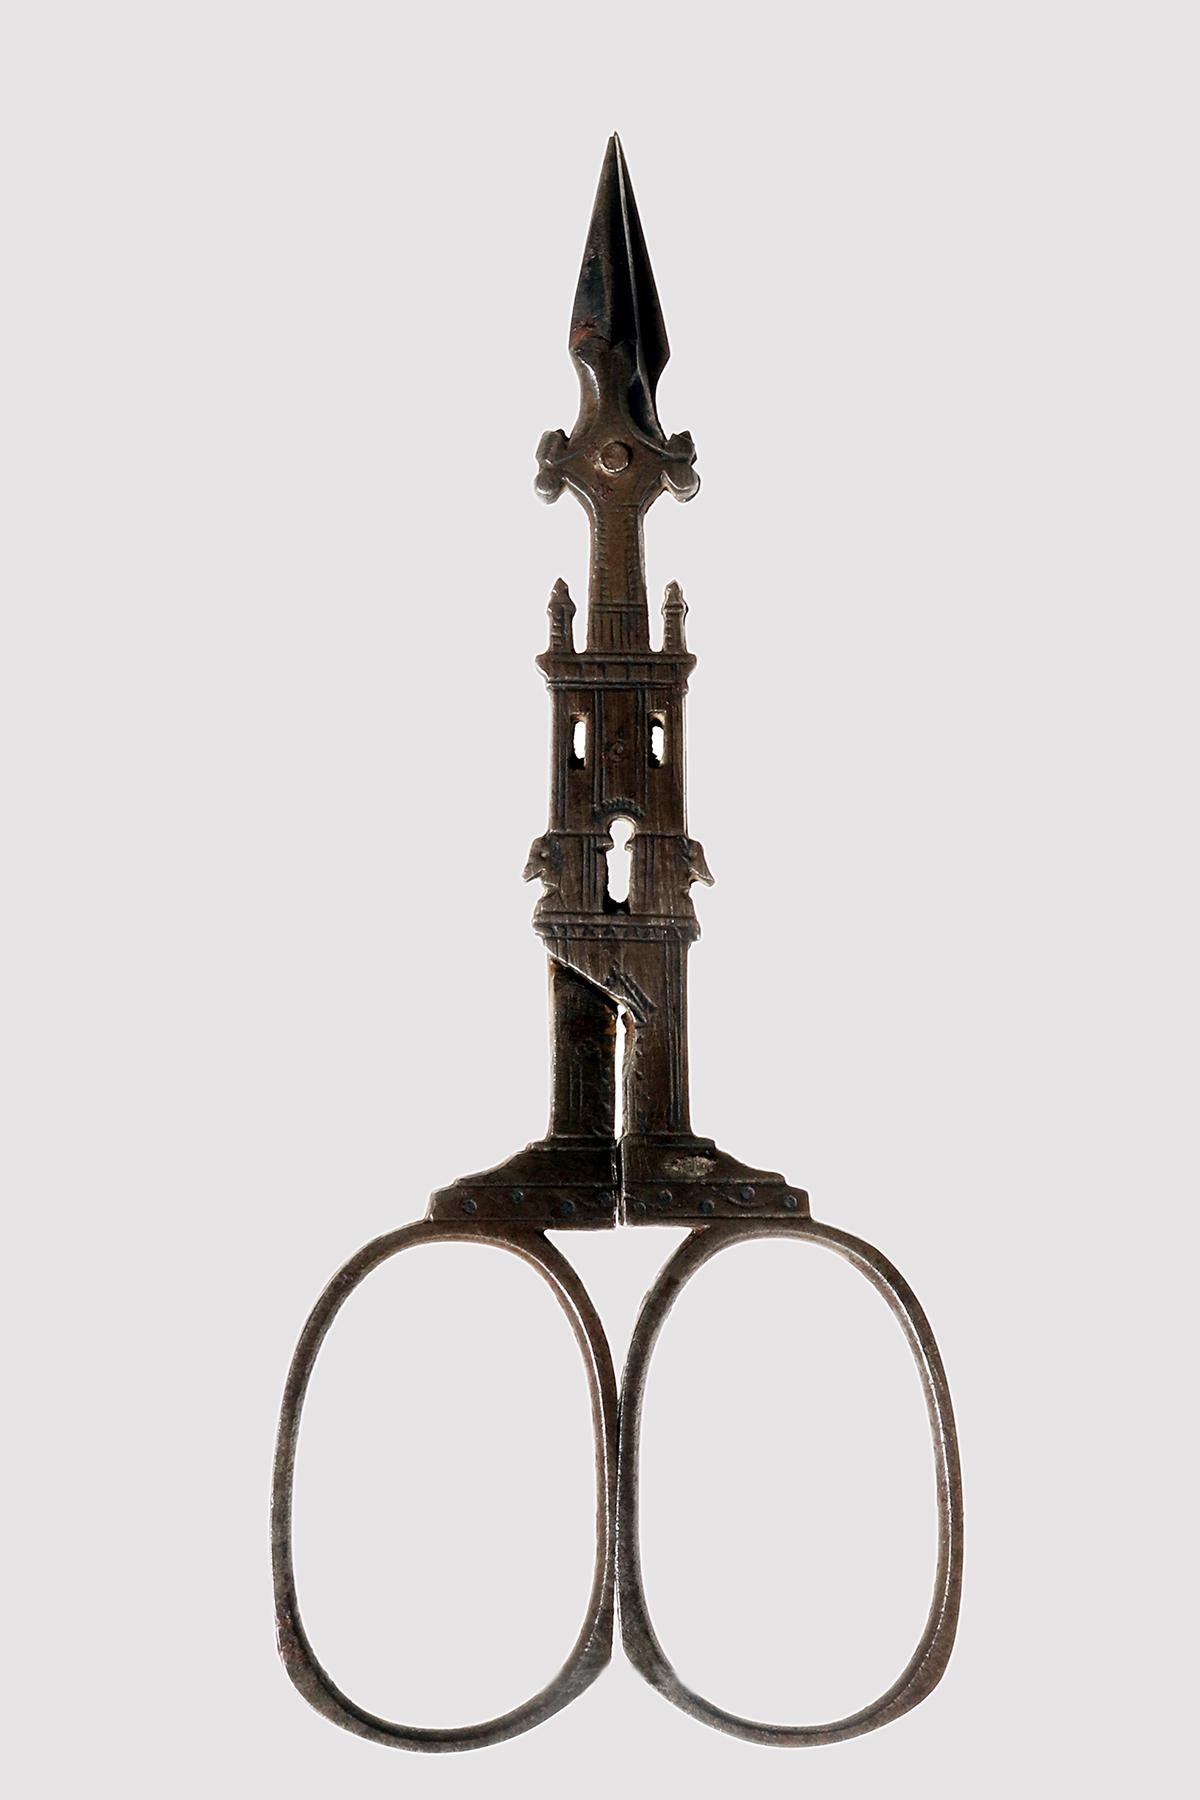 Antique embroidery scissors. Made of cut iron, with a silhouette in the shape of a gothic tower, extremely rich in every part with engravings.
German production, Berlin, Germany, circa 1840.